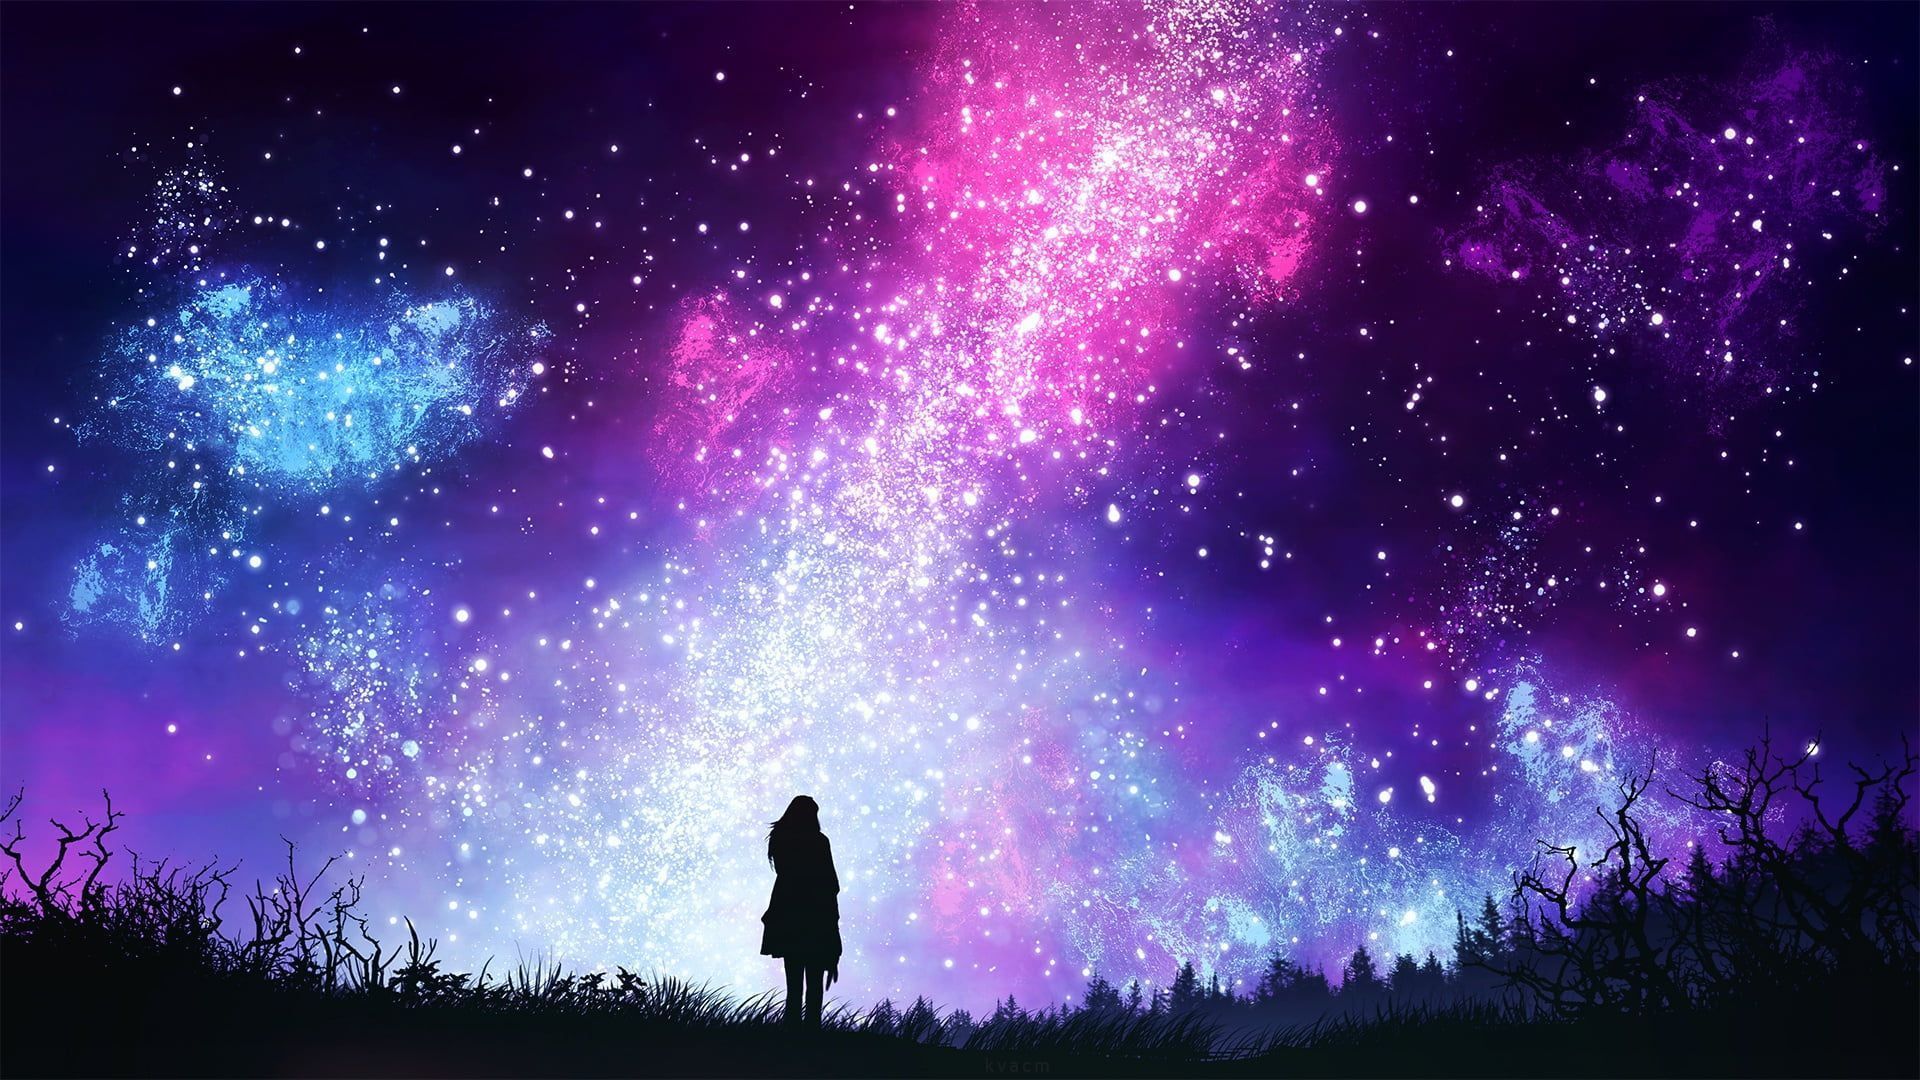 pink, purple, and blue galaxy stars the sky #girl #space #night by kvacm P. Suggestions. Night sky wallpaper, Galaxy painting, Silhouette art